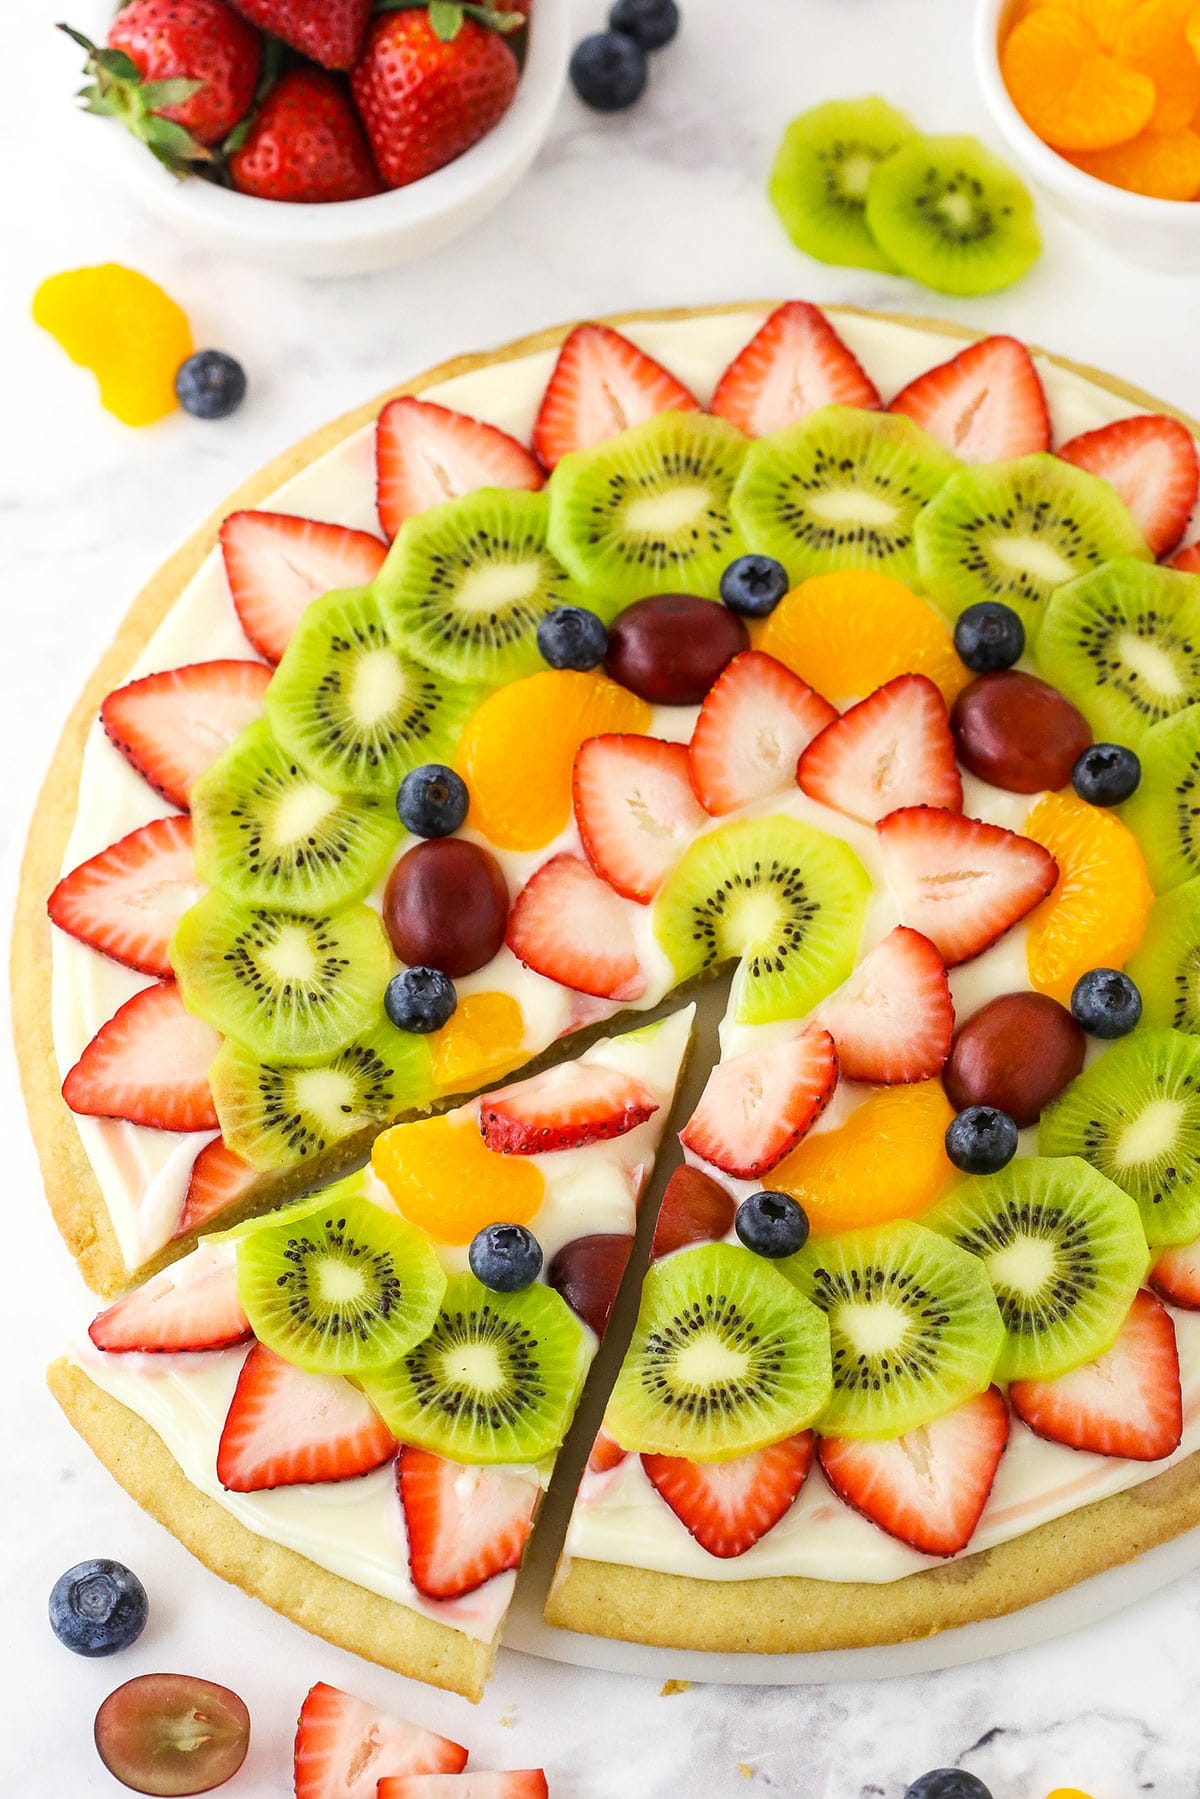 A homemade fruit pizza on a marble countertop with one slice cut out from the pizza